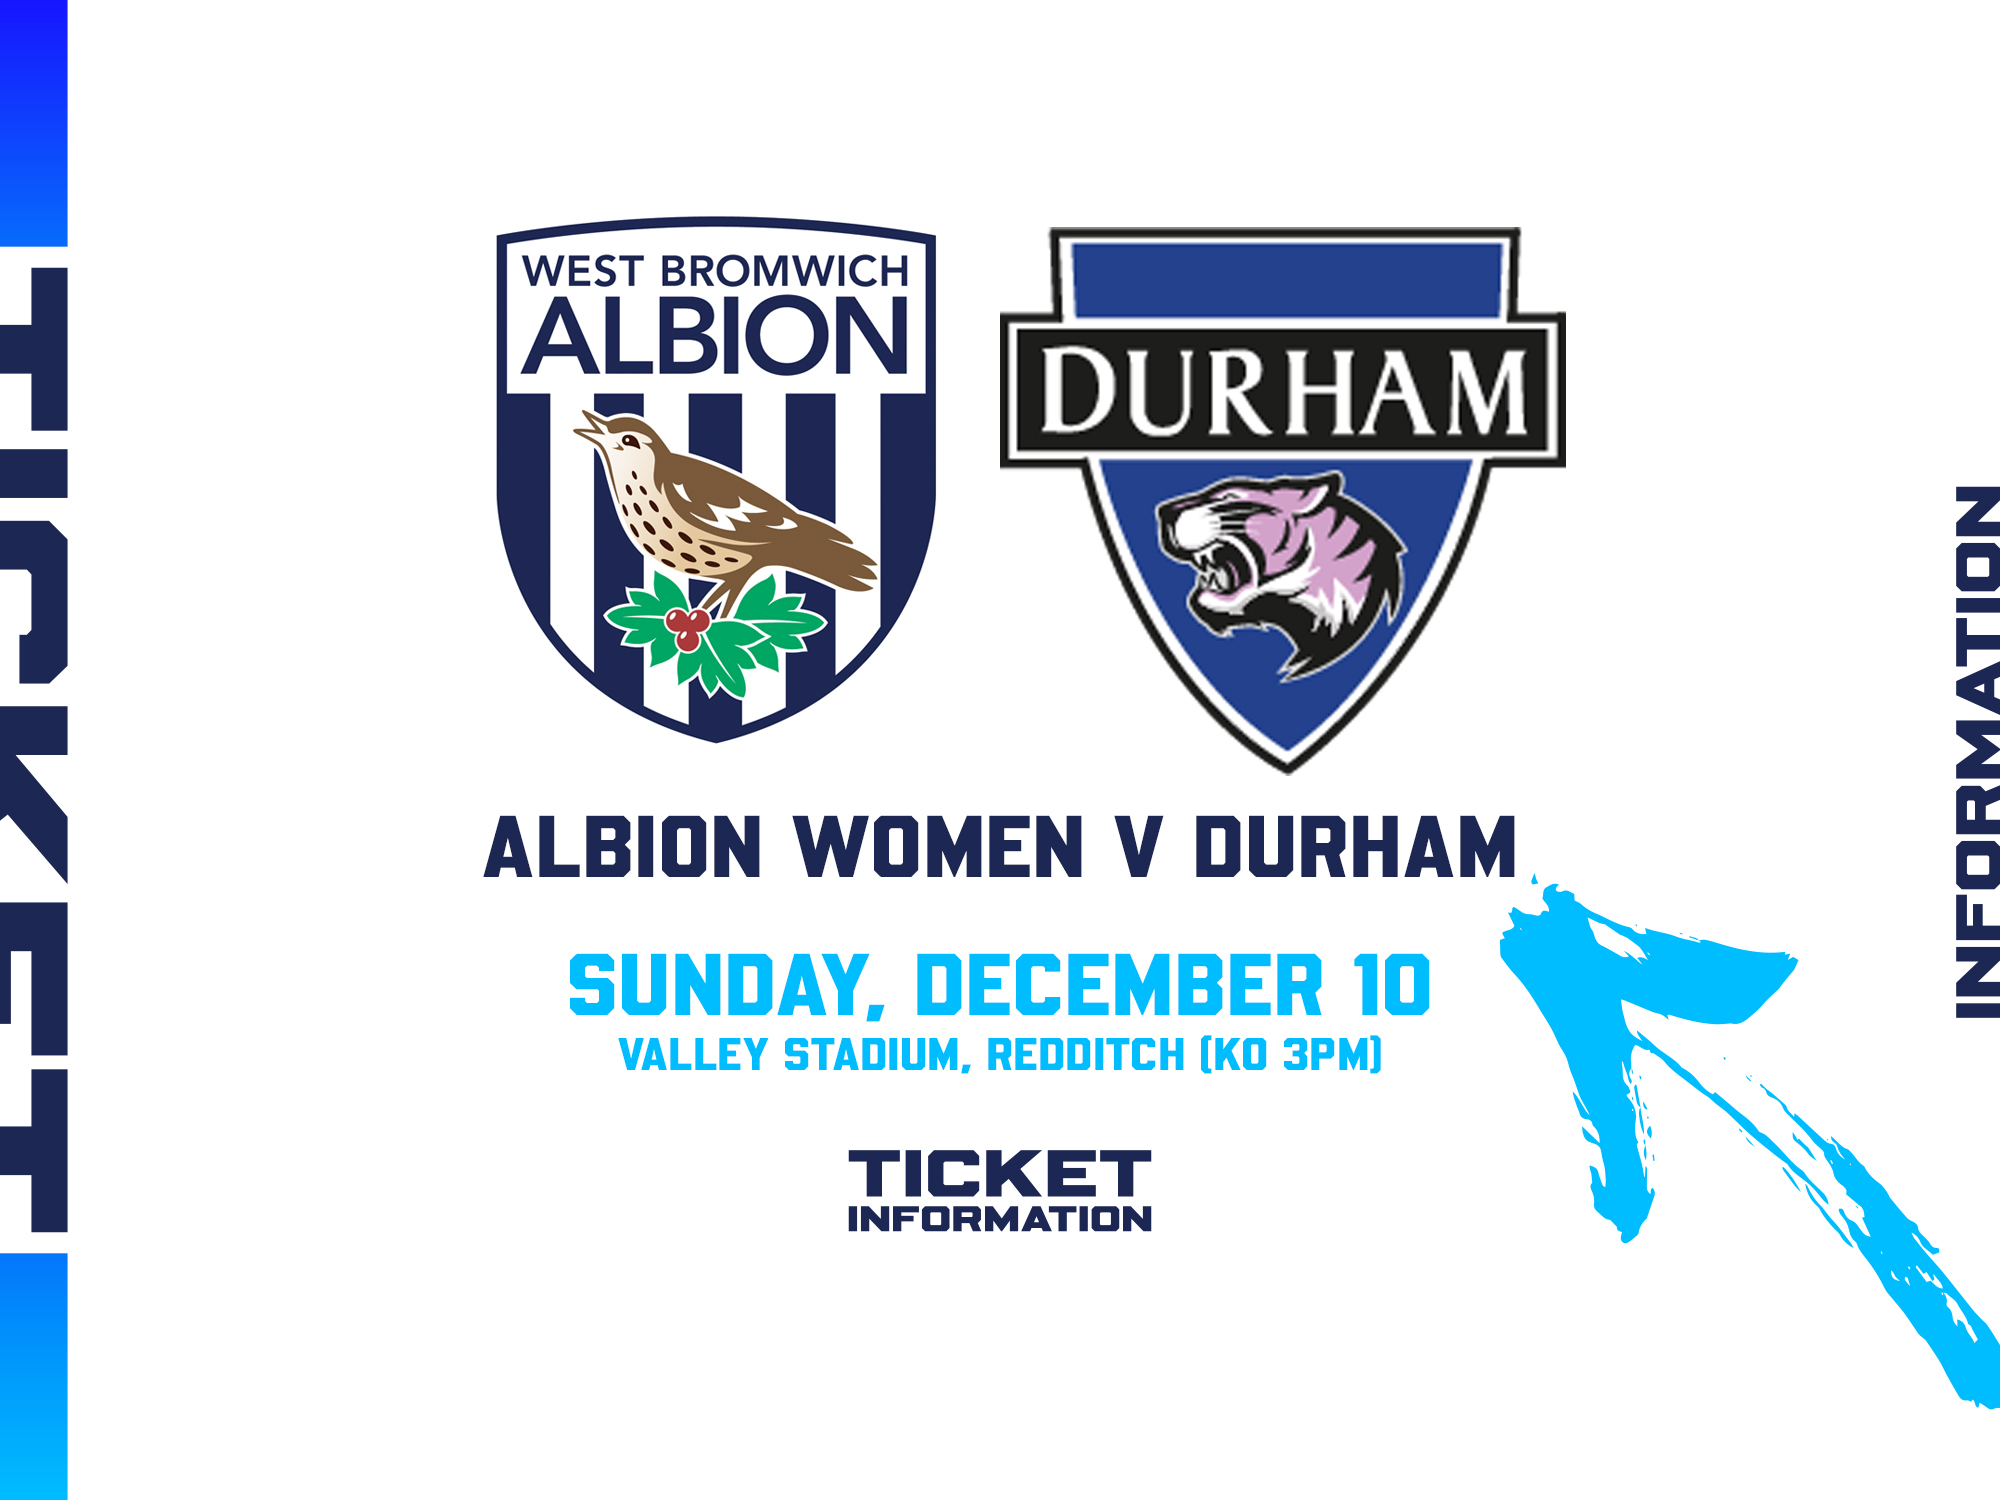 A ticket graphic displaying information for Albion Women's game against Durham